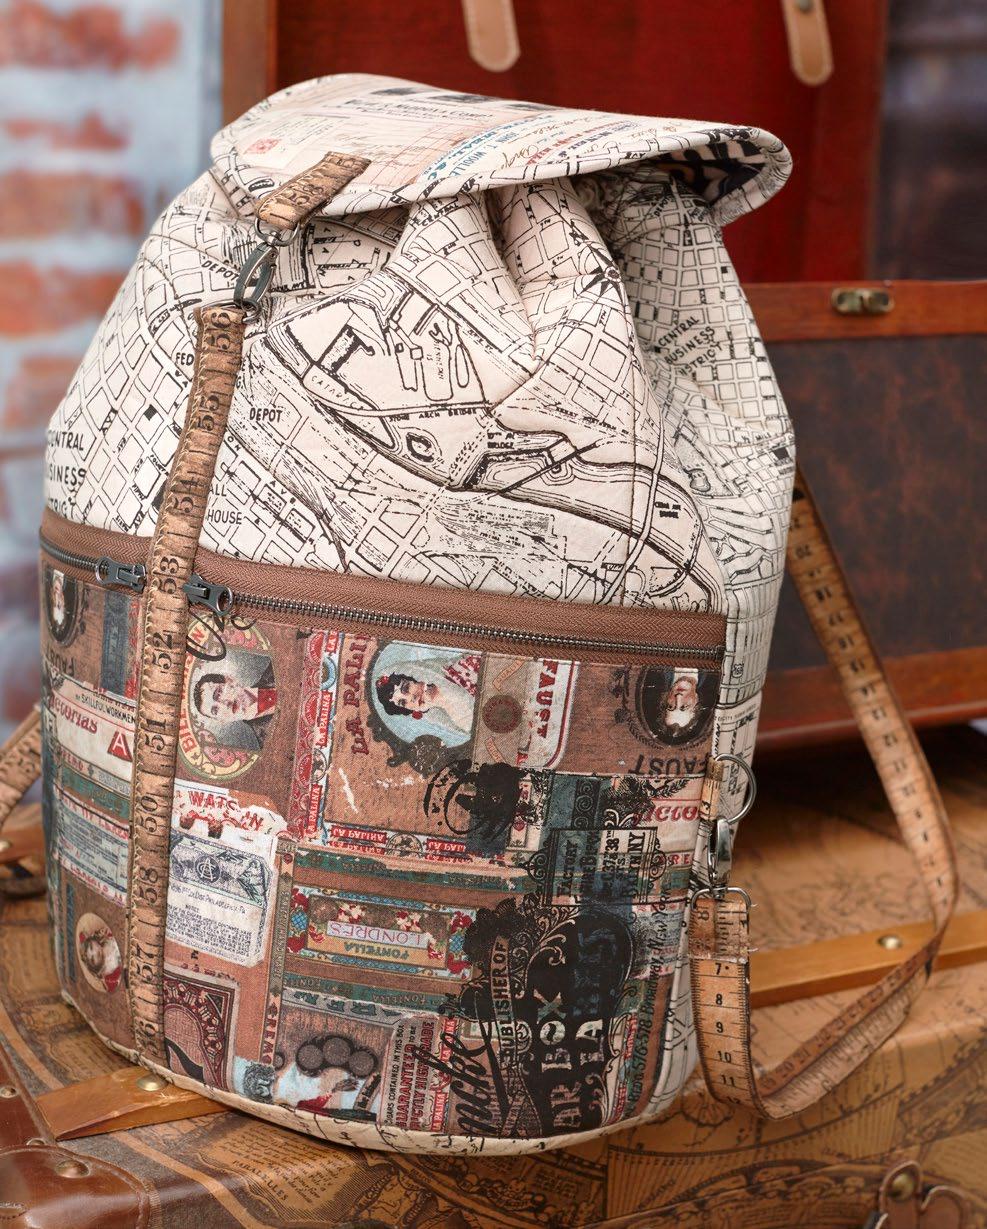 Featuring Tim Holtz Eclectic Elements Zippers, Hardware, and Dapper fabric collection Whether you re adventuring to a foreign country or navigating your city s streets, you can carry every thing you